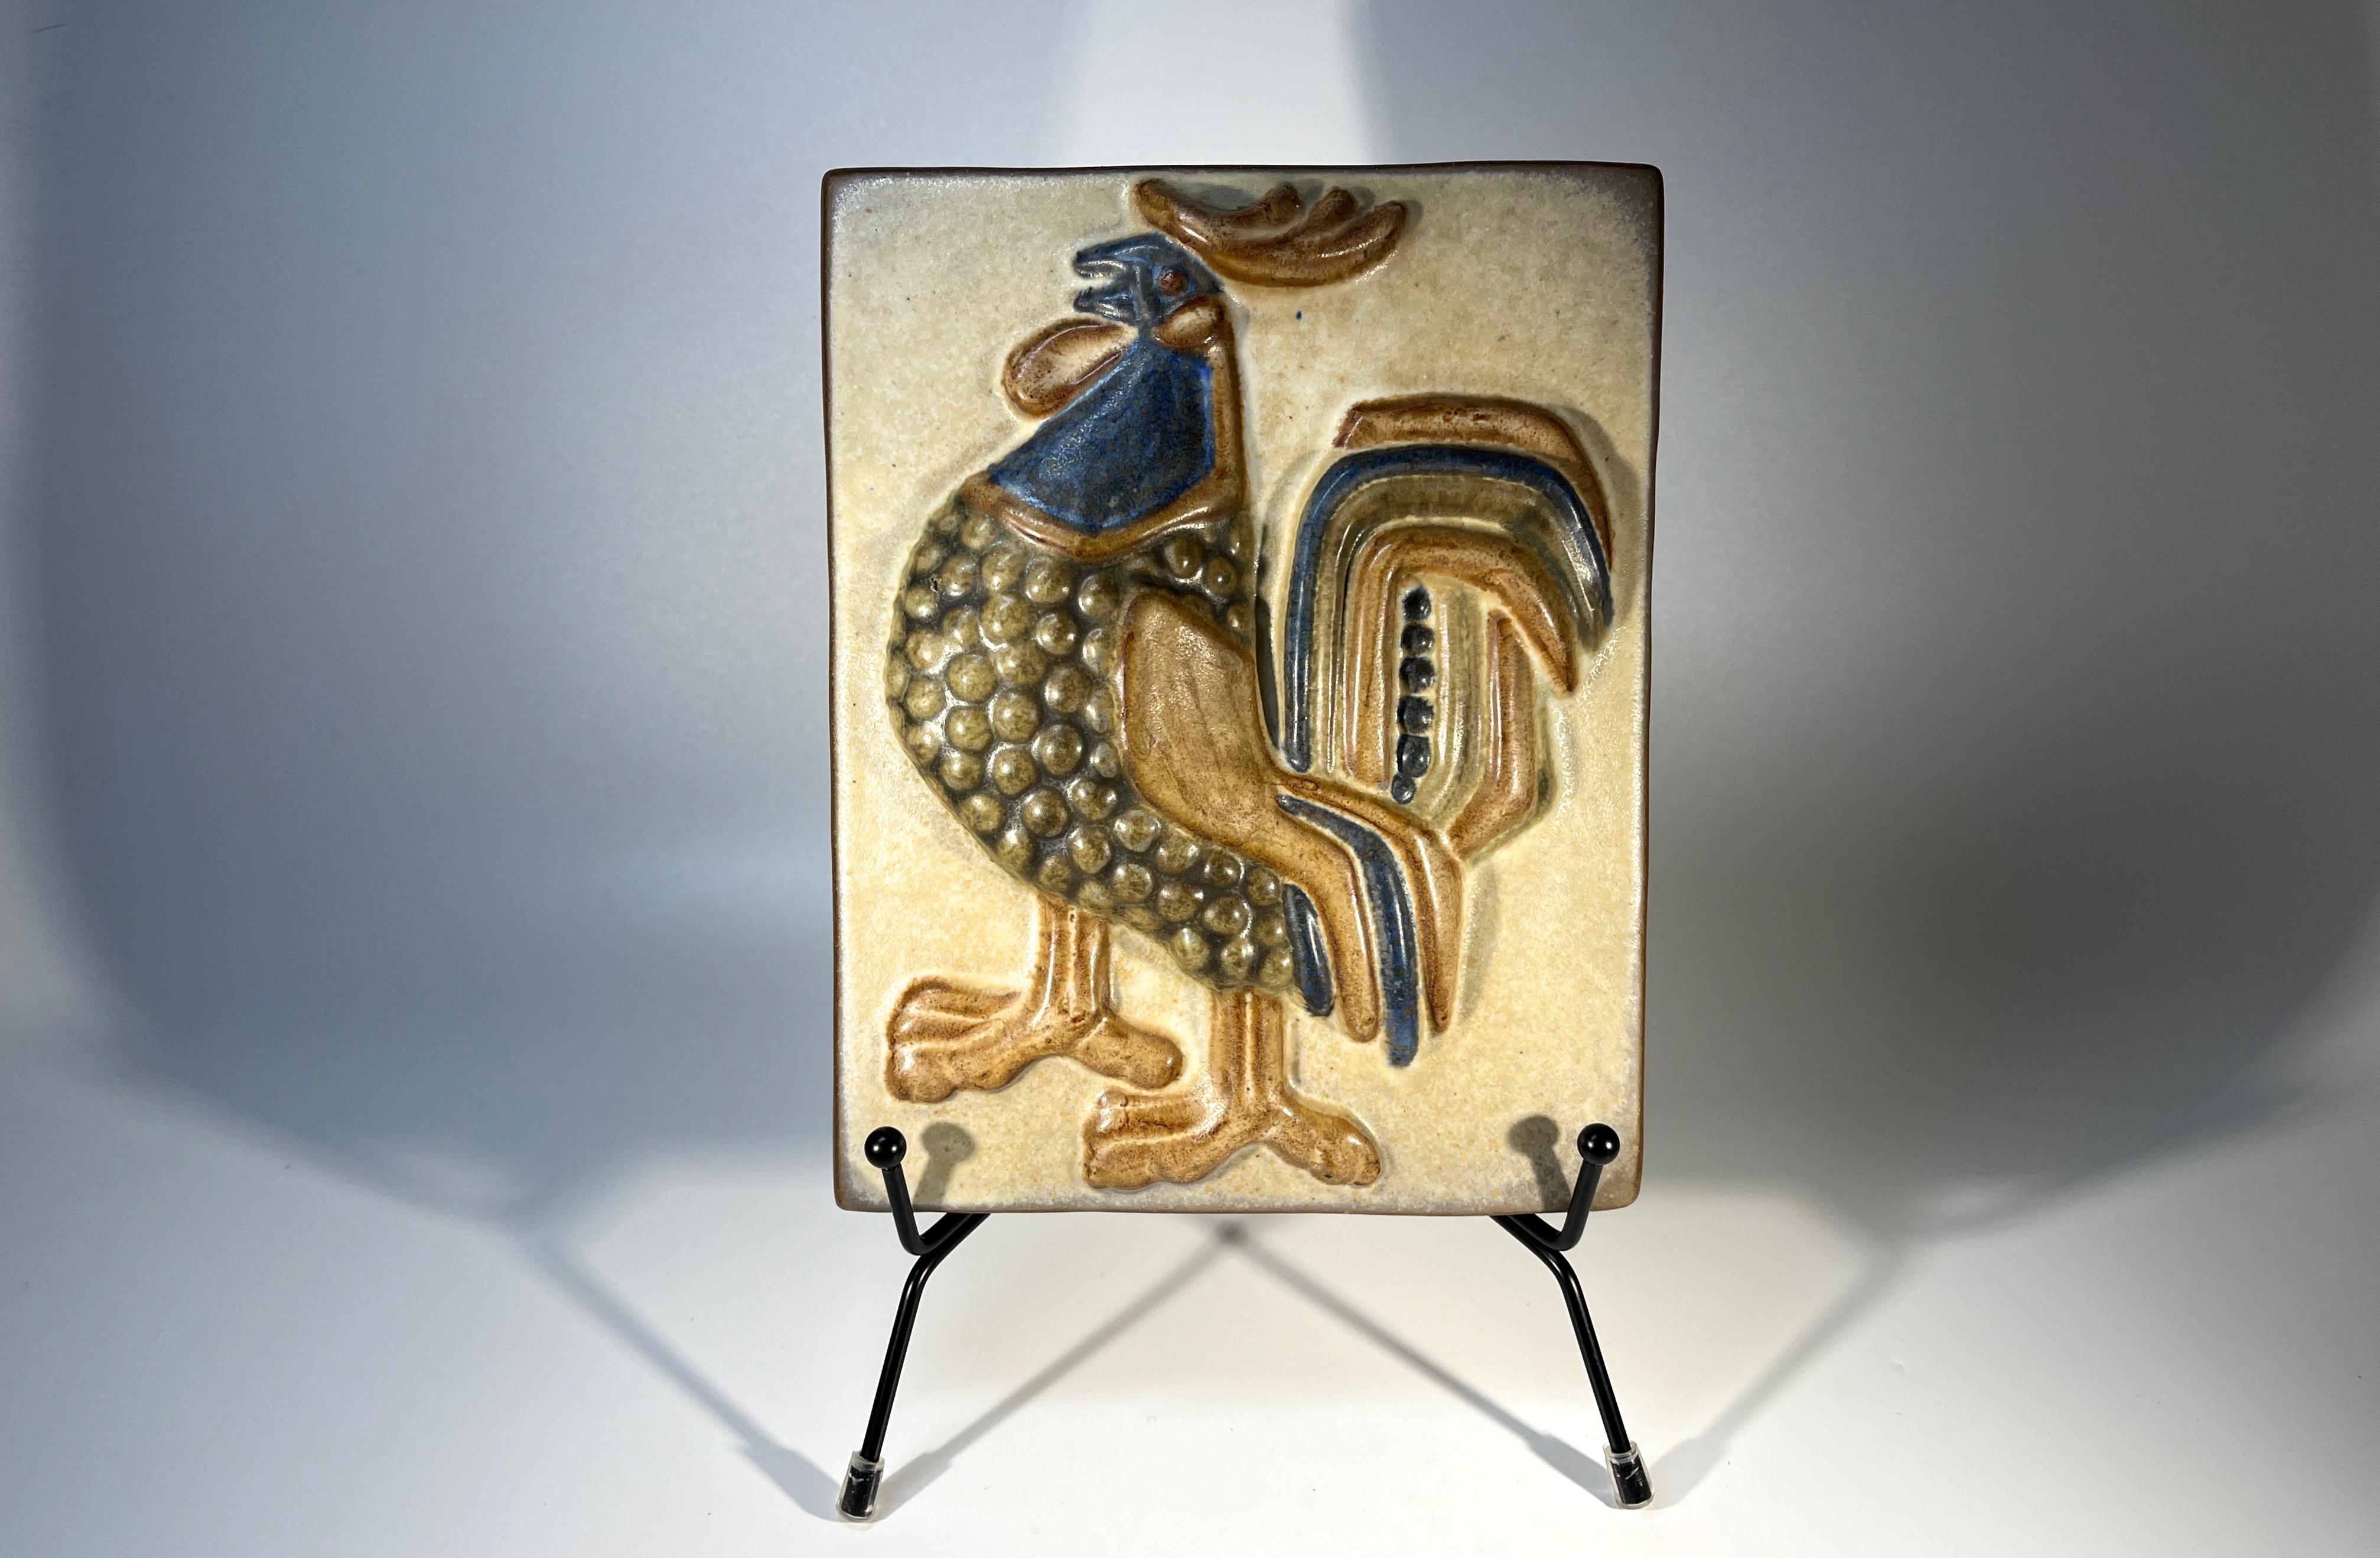 20th Century Rooster By Marianne Starck For Michael Andersen. Danish Wall Plaque For Sale